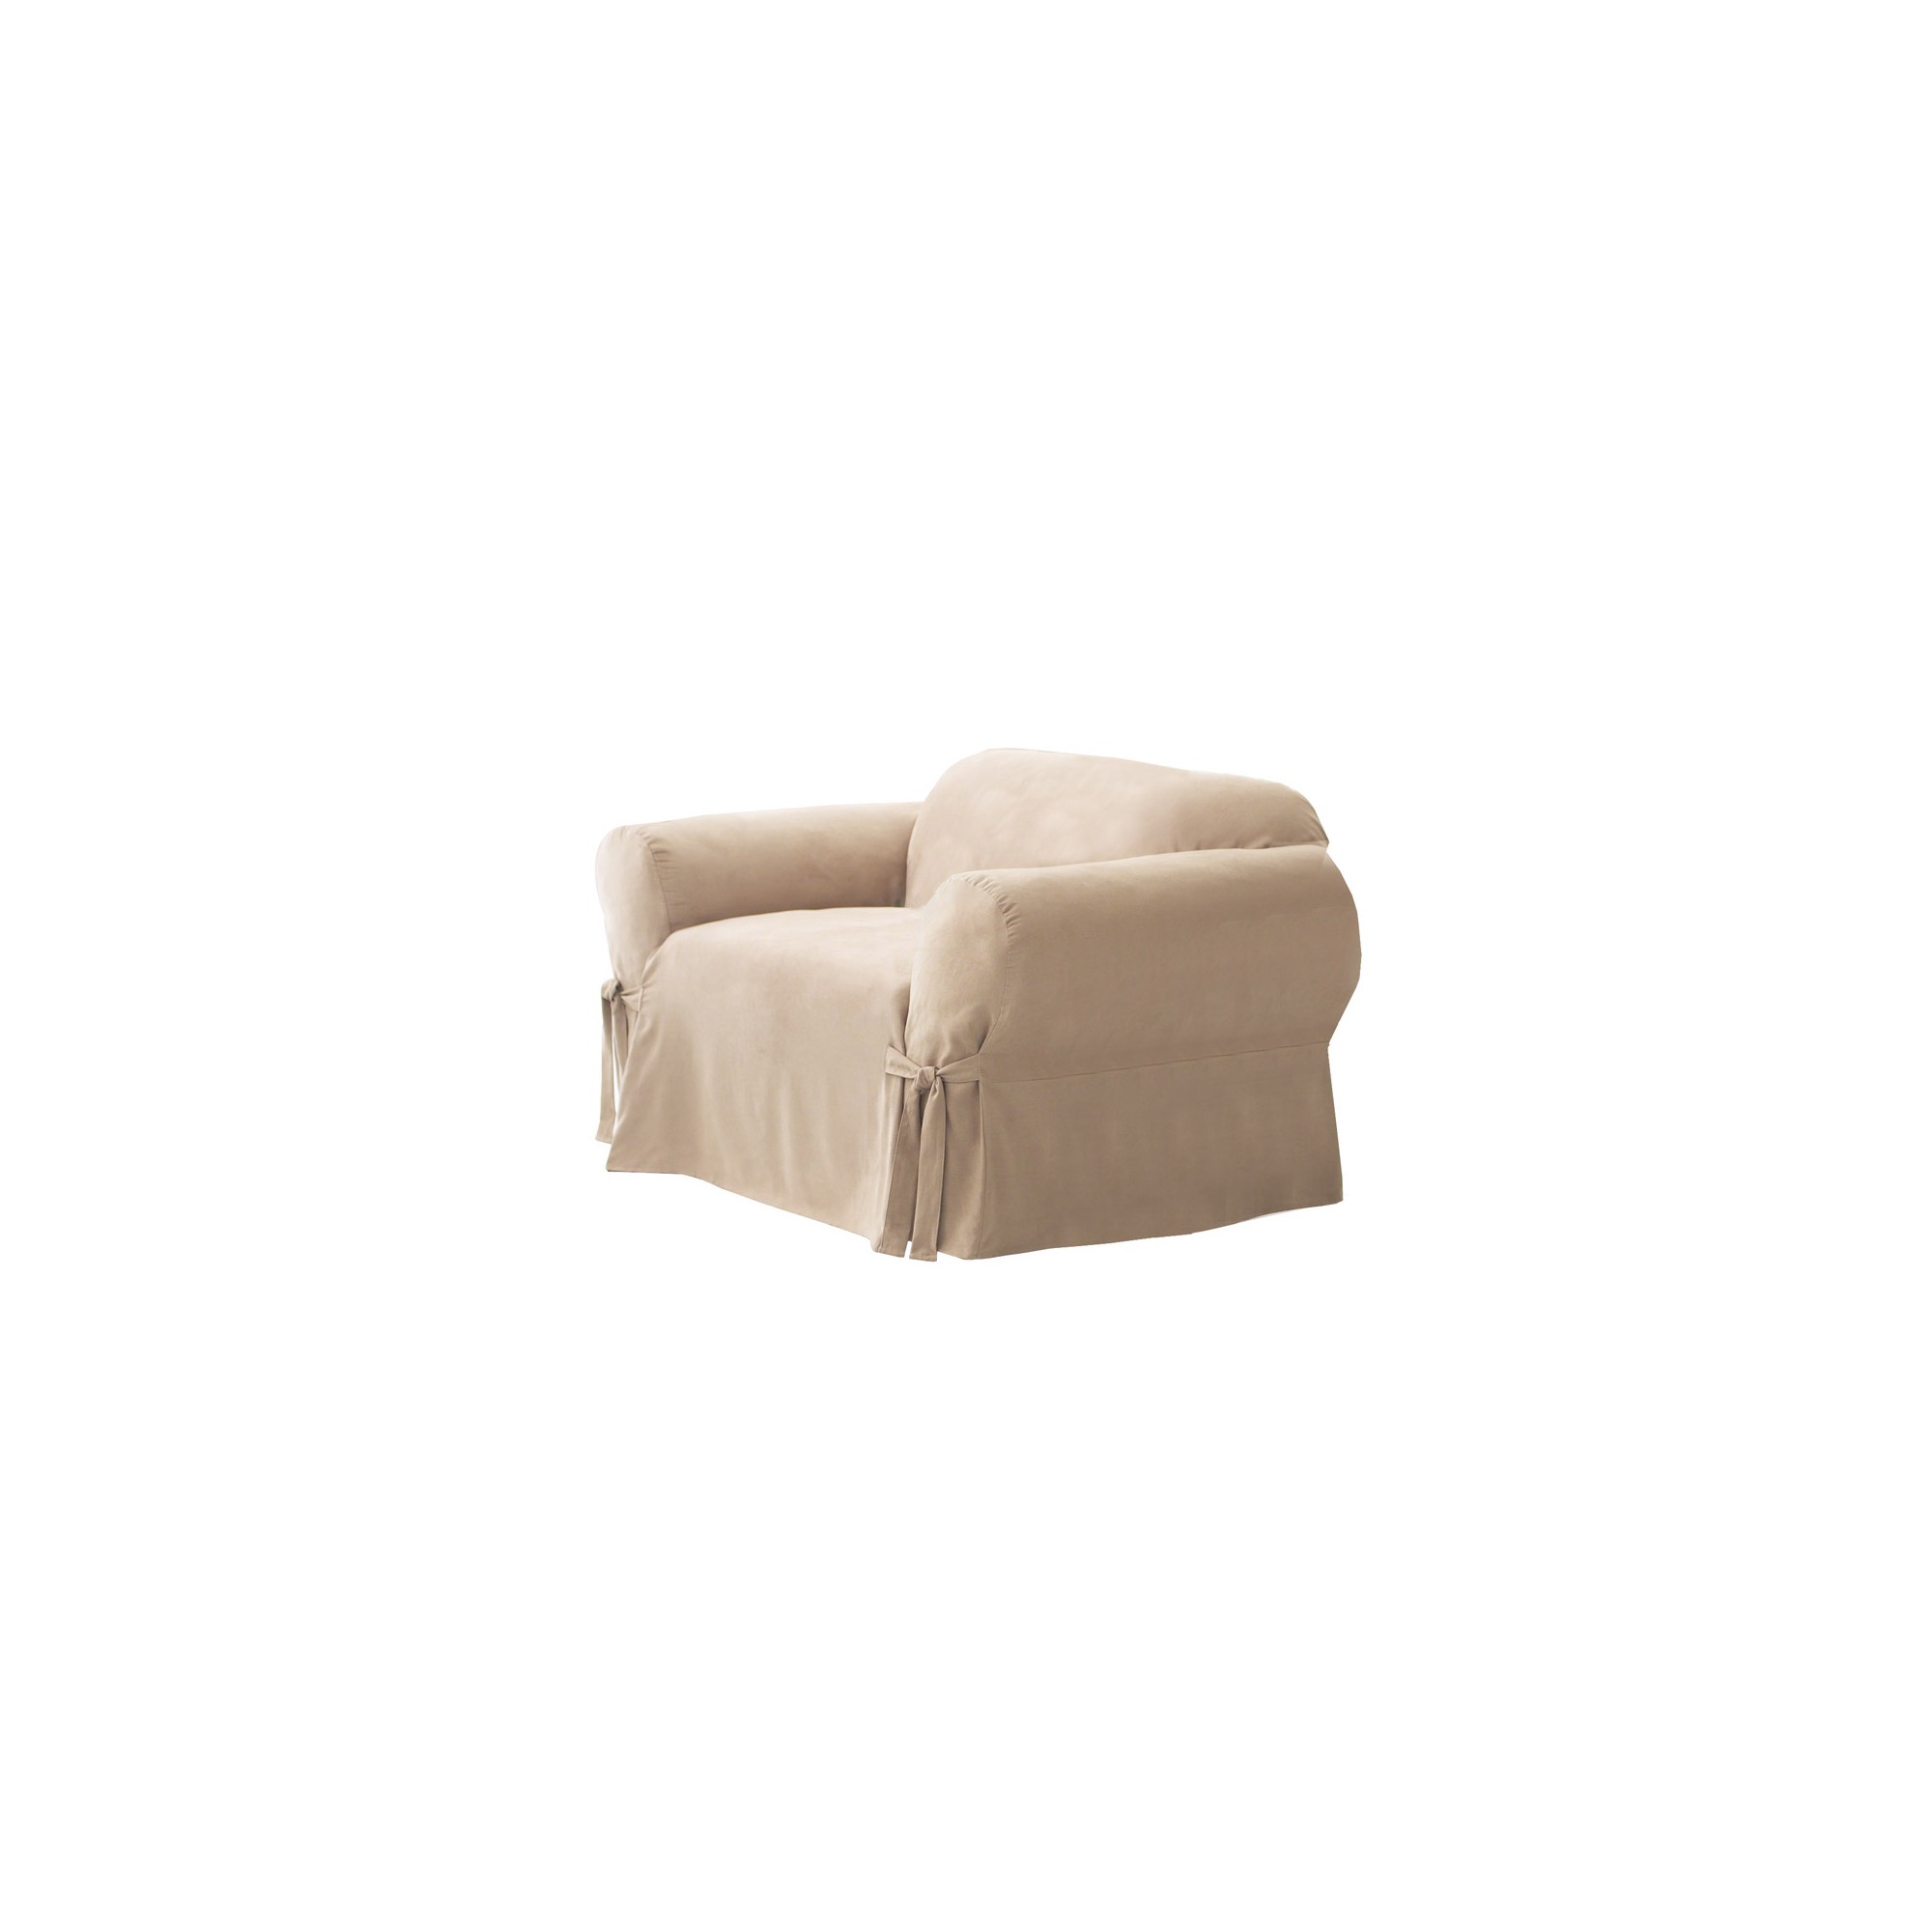 Soft Suede Chair Slipcover Taupe - Sure Fit, Brown